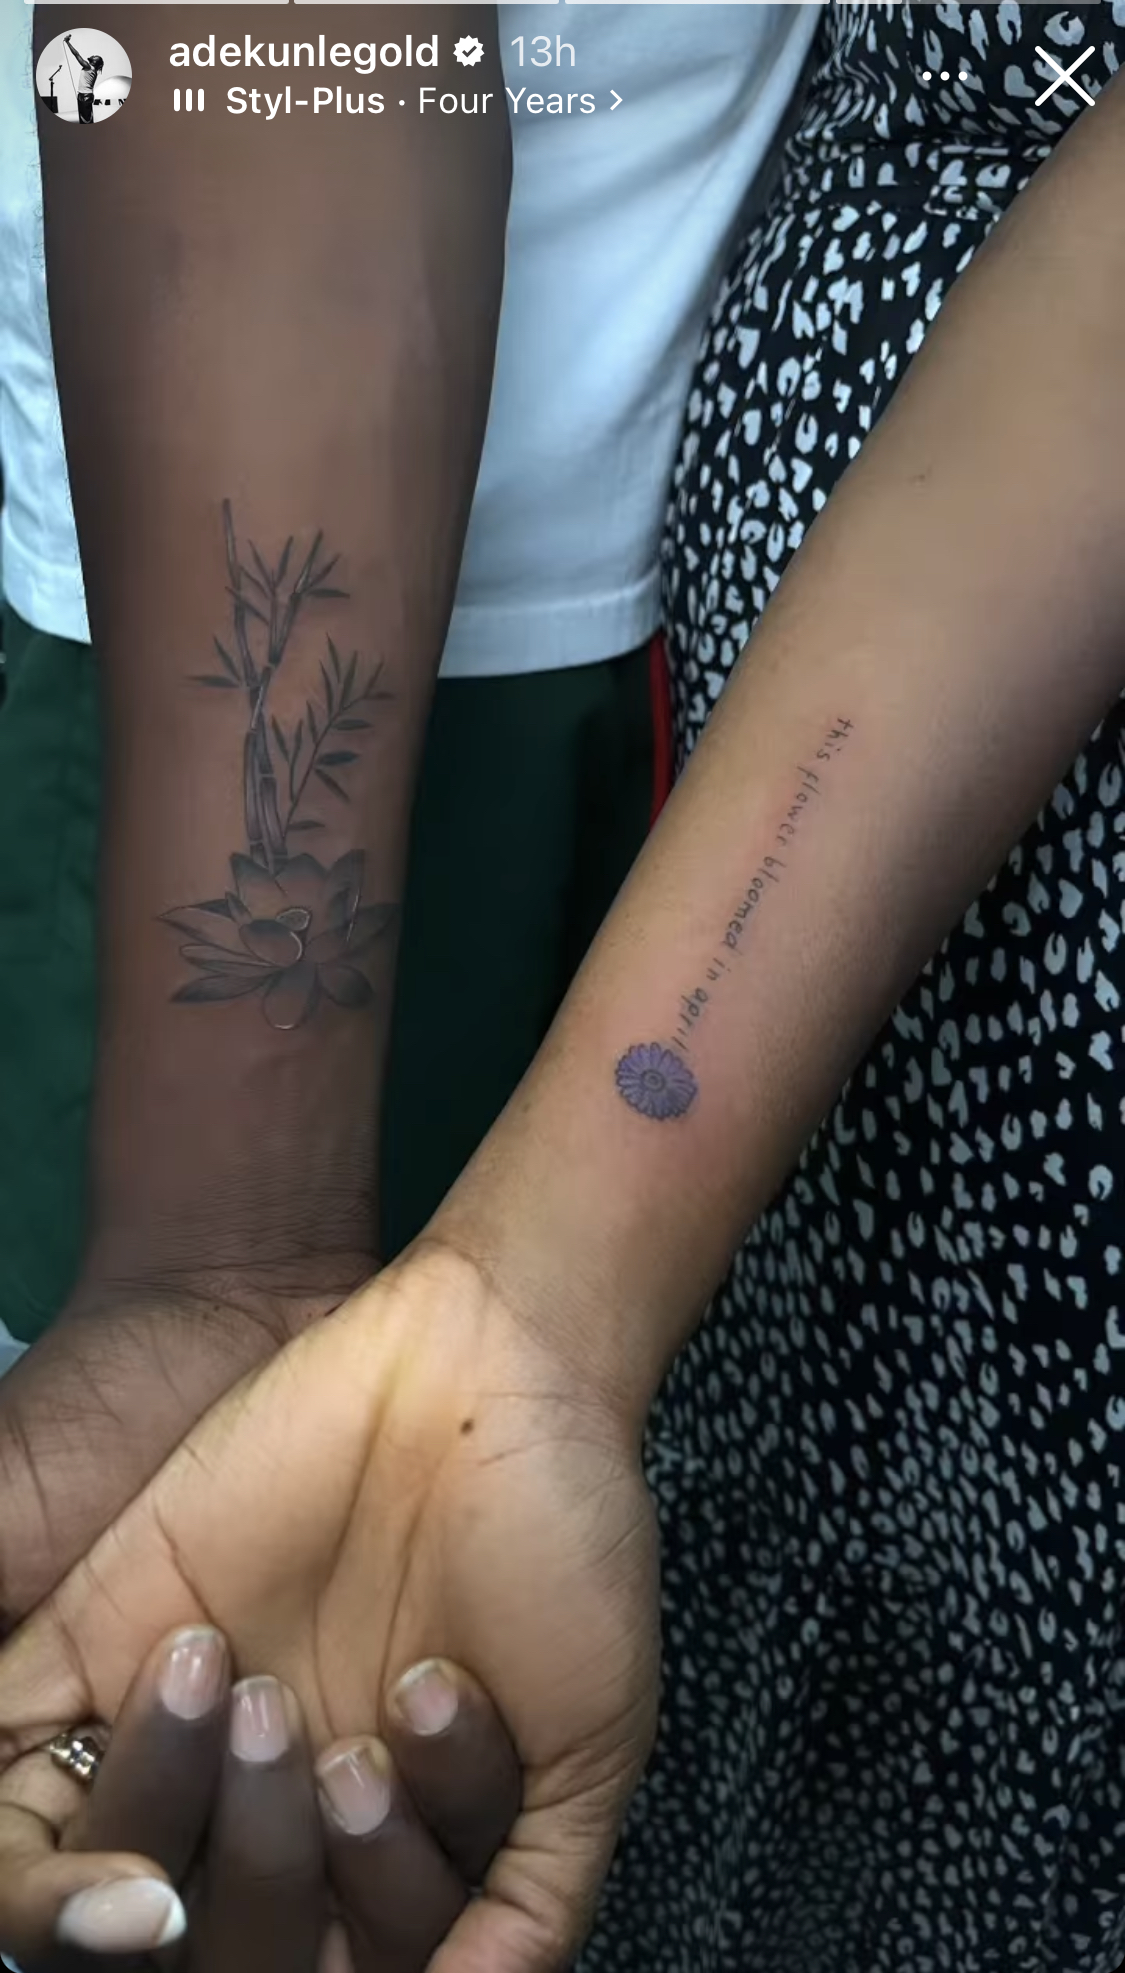 After Davido and Chioma, Adekunle Gold and Simi get matching Tattoos [photo]